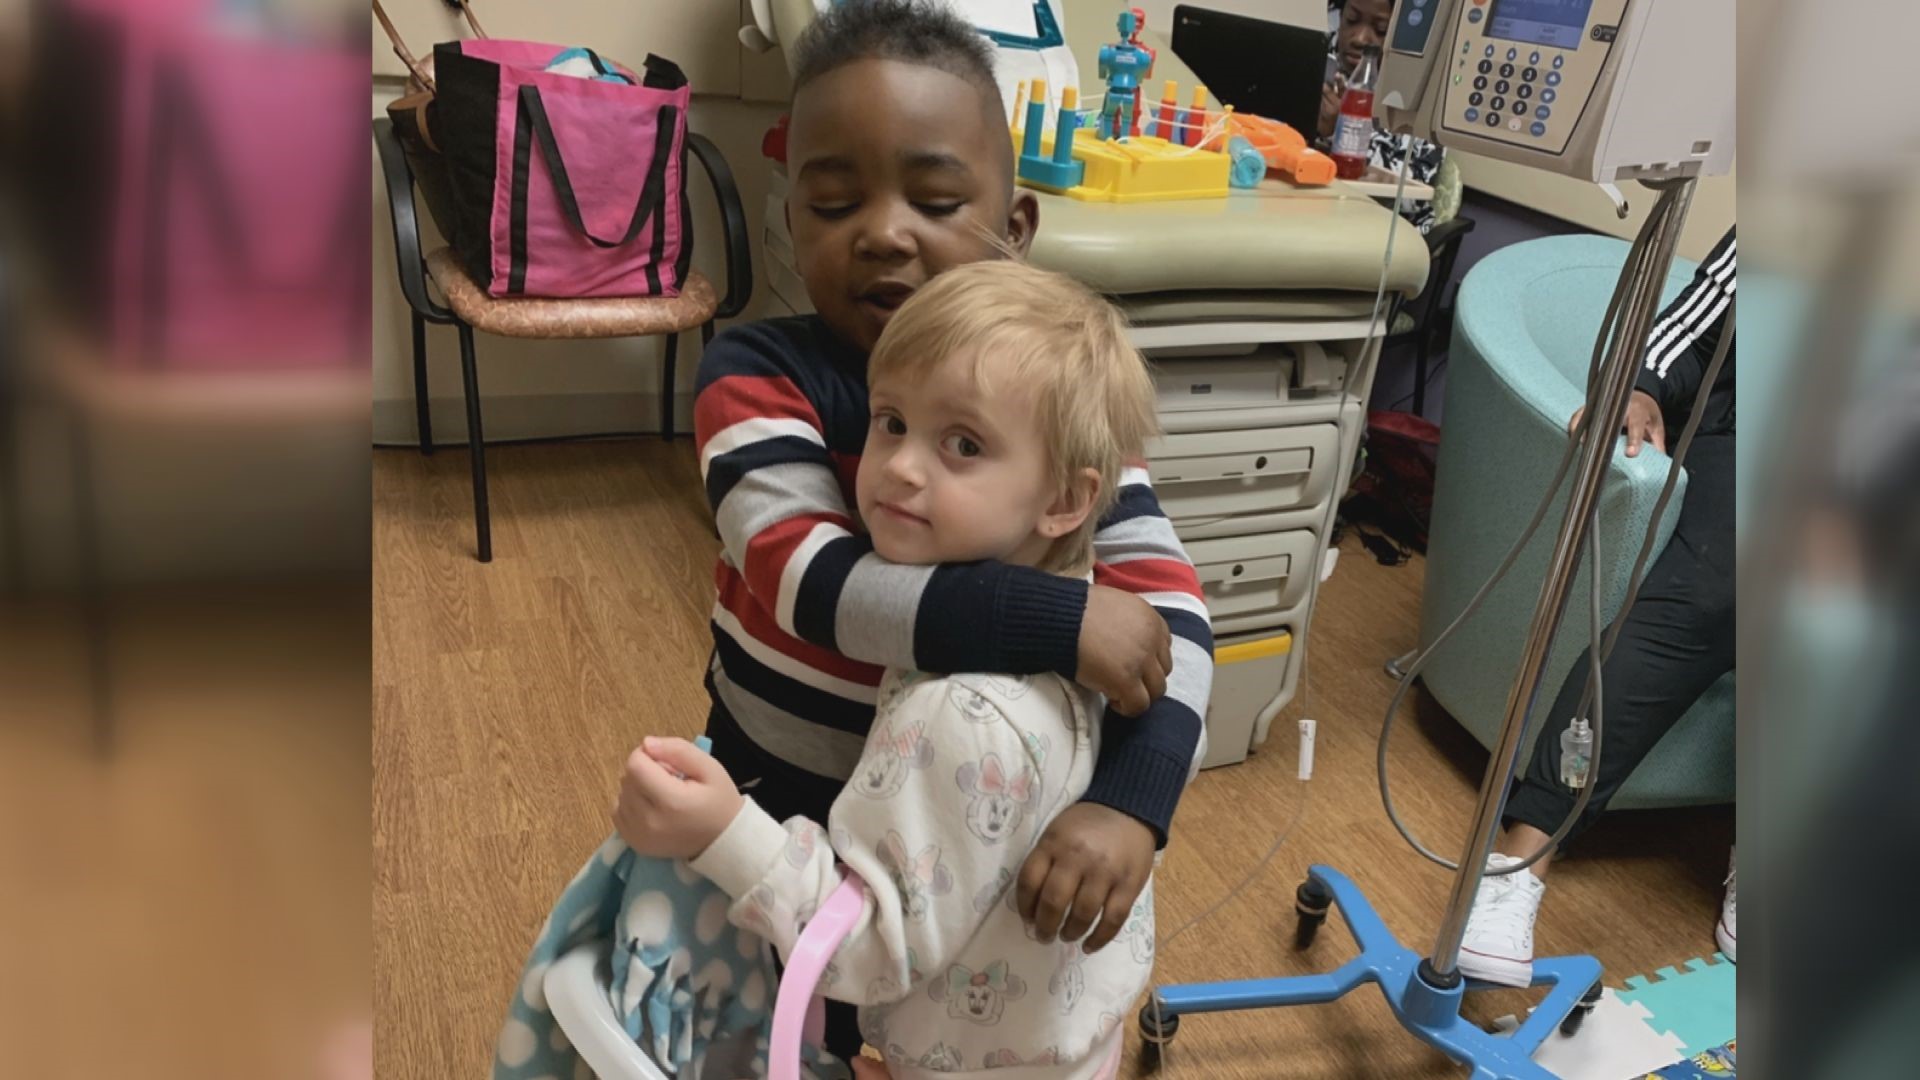 Keason's family saw Hailey Holder's story on 13WMAZ in 2019. They reached out to share resources, but that bloomed into so much more.